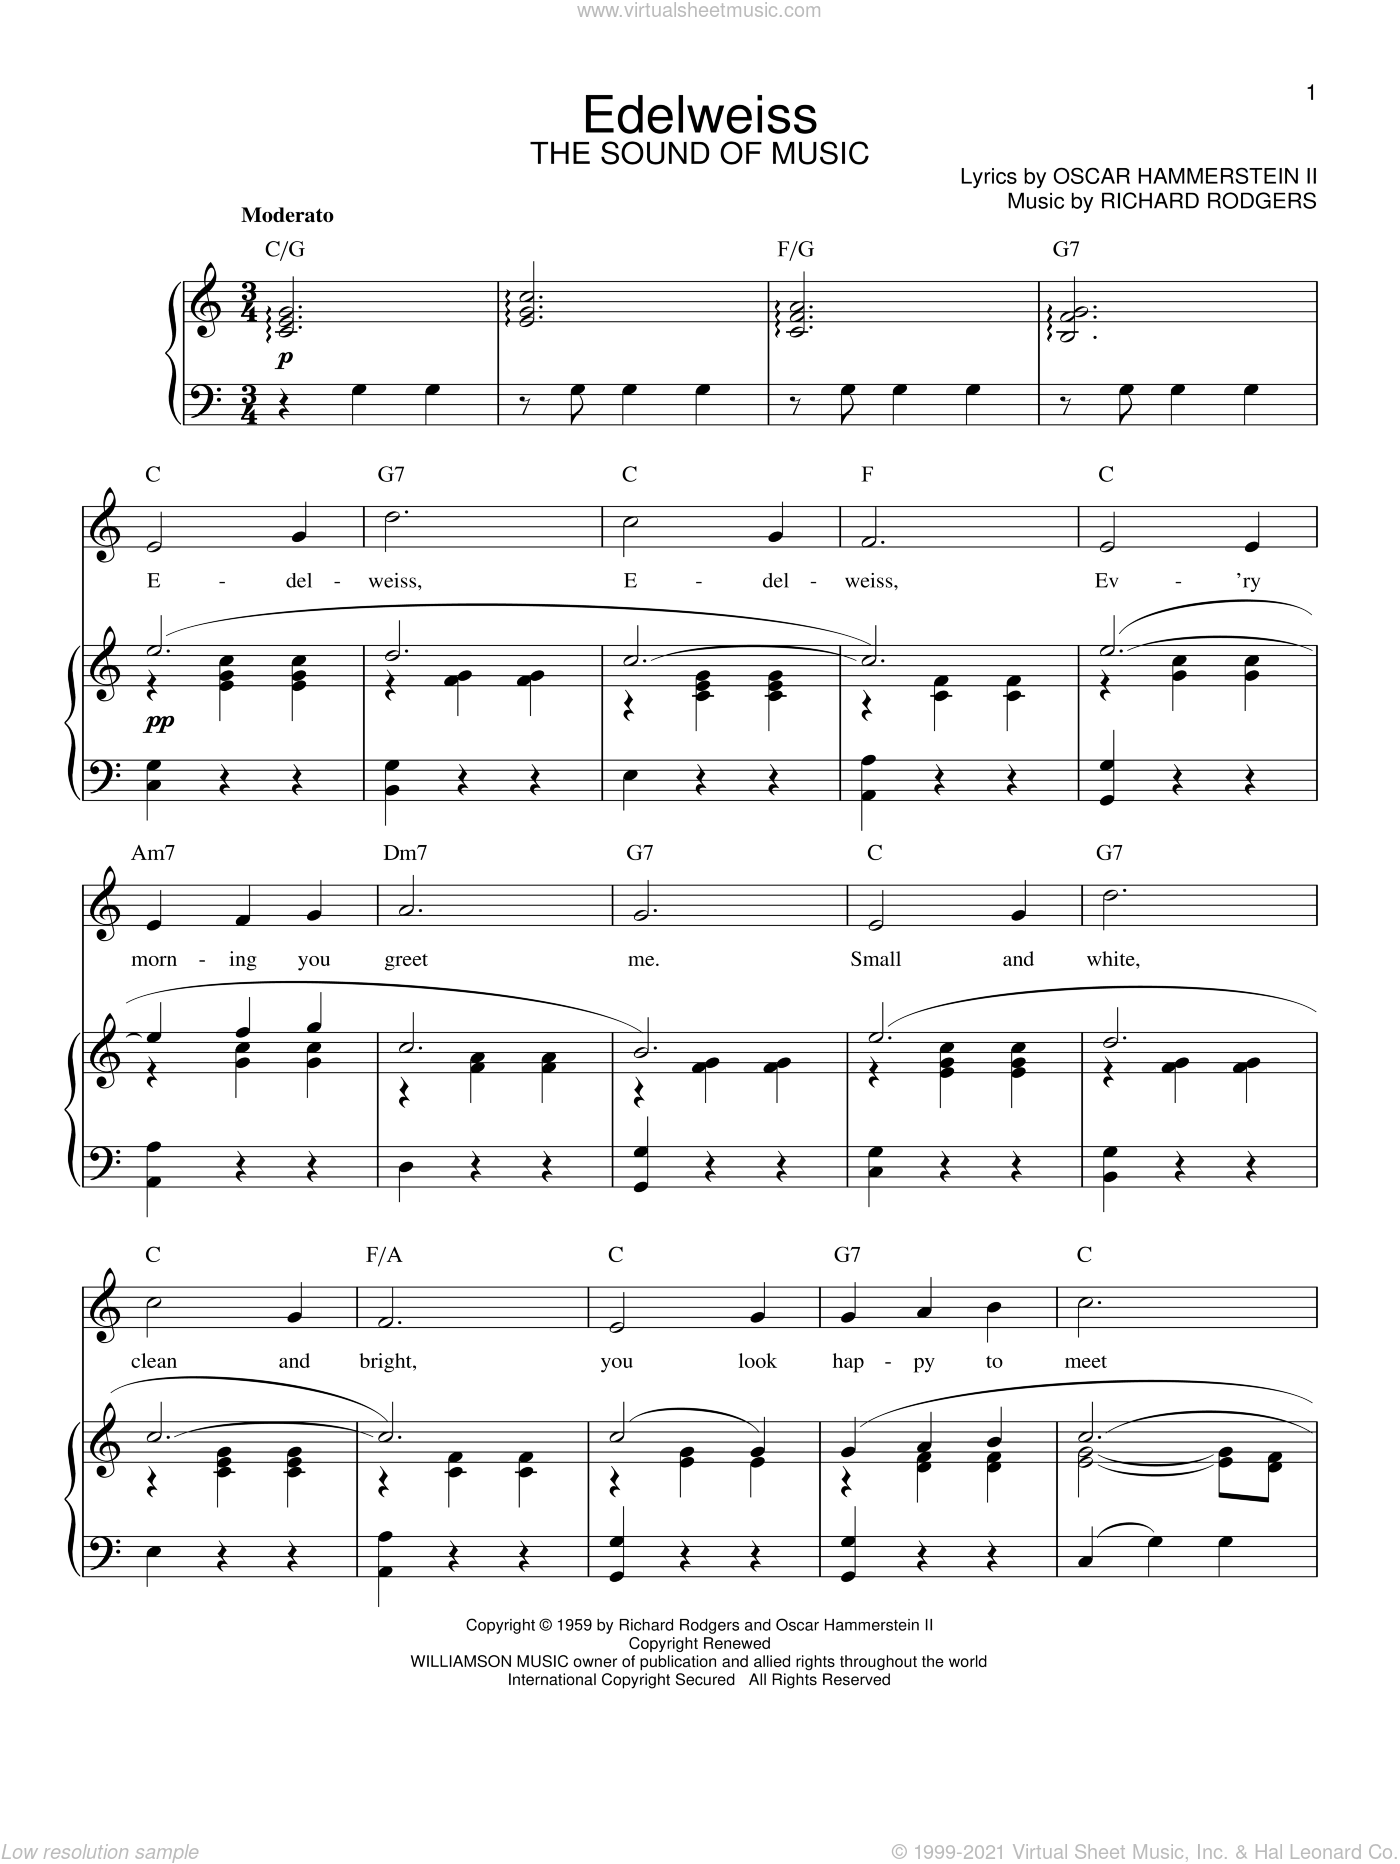 Hammerstein - Edelweiss sheet music for voice and piano [PDF]